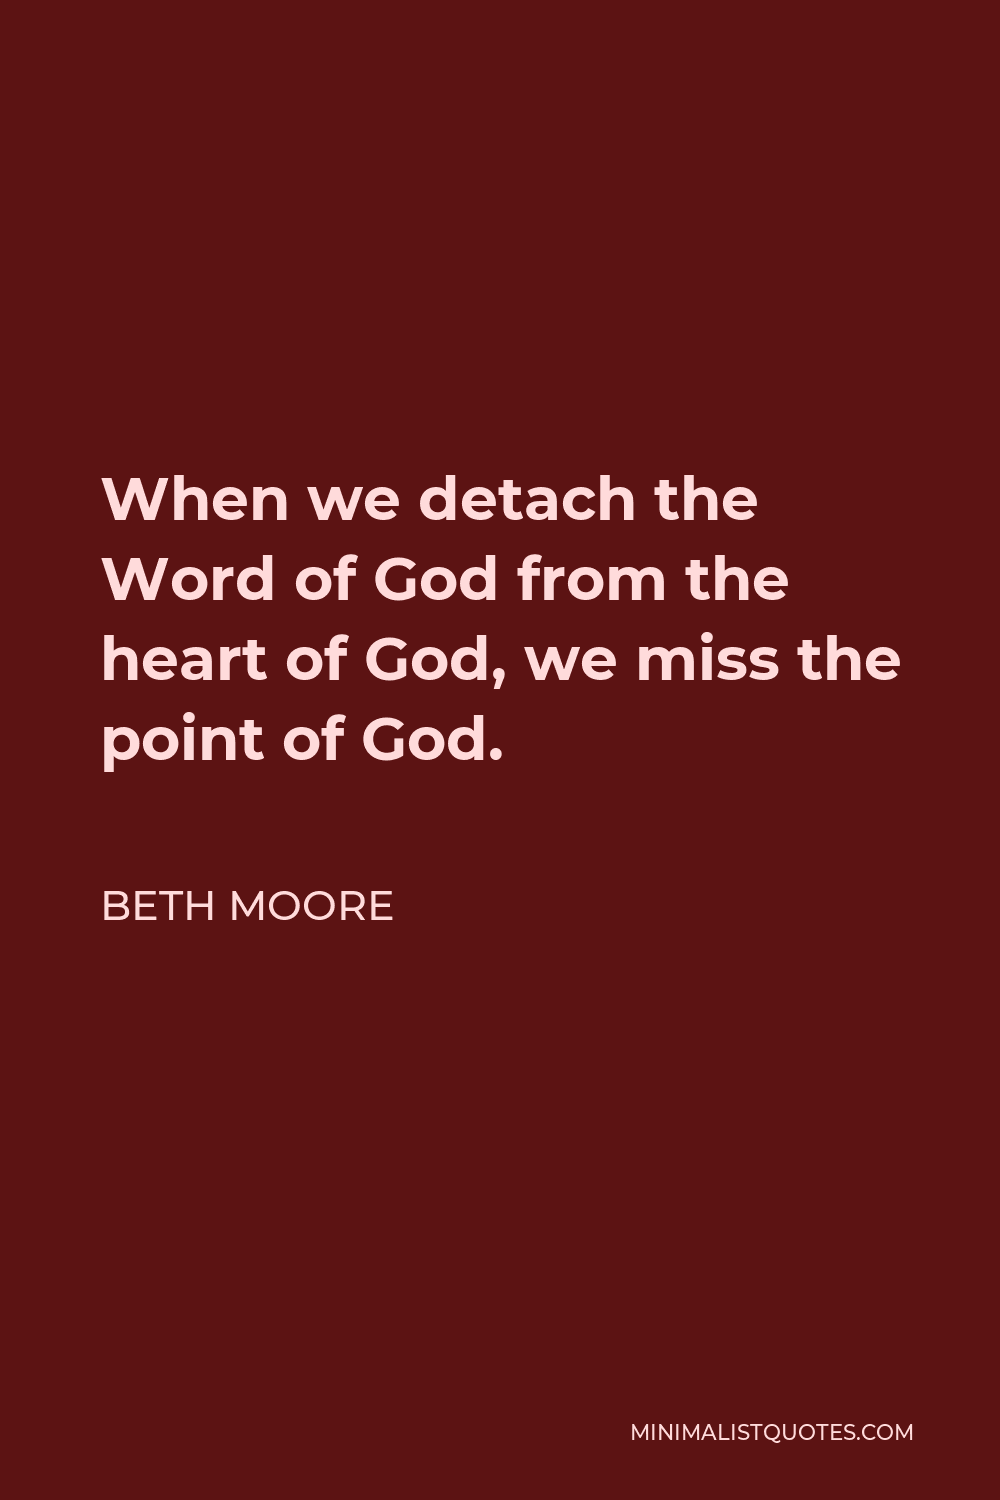 Beth Moore Quote - When we detach the Word of God from the heart of God, we miss the point of God.